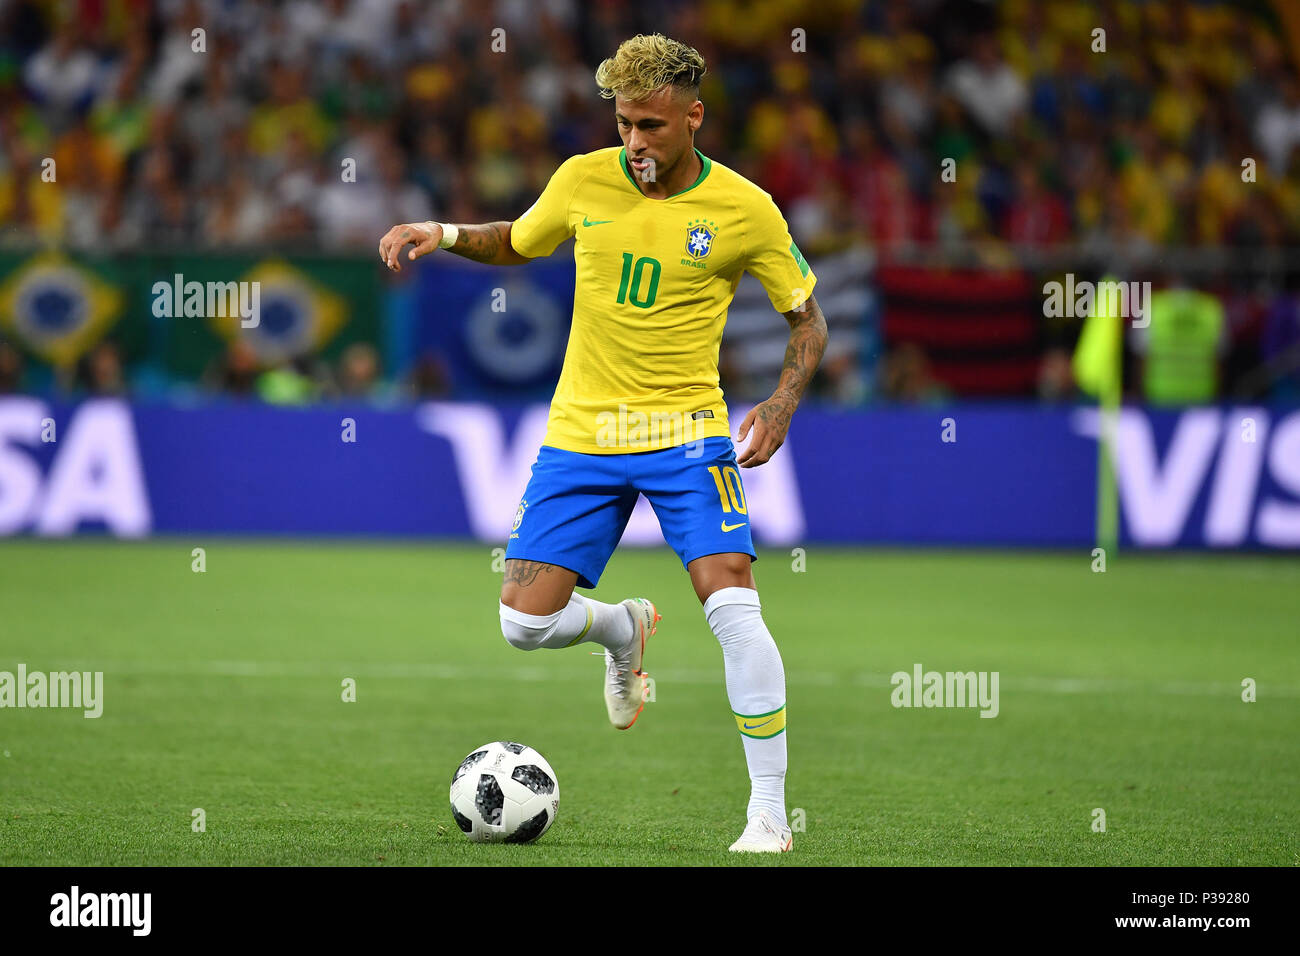 NEYMAR (BRA), Action, Single Action, Frame, Cut Out, Full Body, Whole  Figure. Brazil (BRA) -Switzerland (SUI) 1-1, Preliminary Round, Group E,  match 09, on 17.06.2018 in Rostov-on-Don, Rostov Arena. Football World Cup